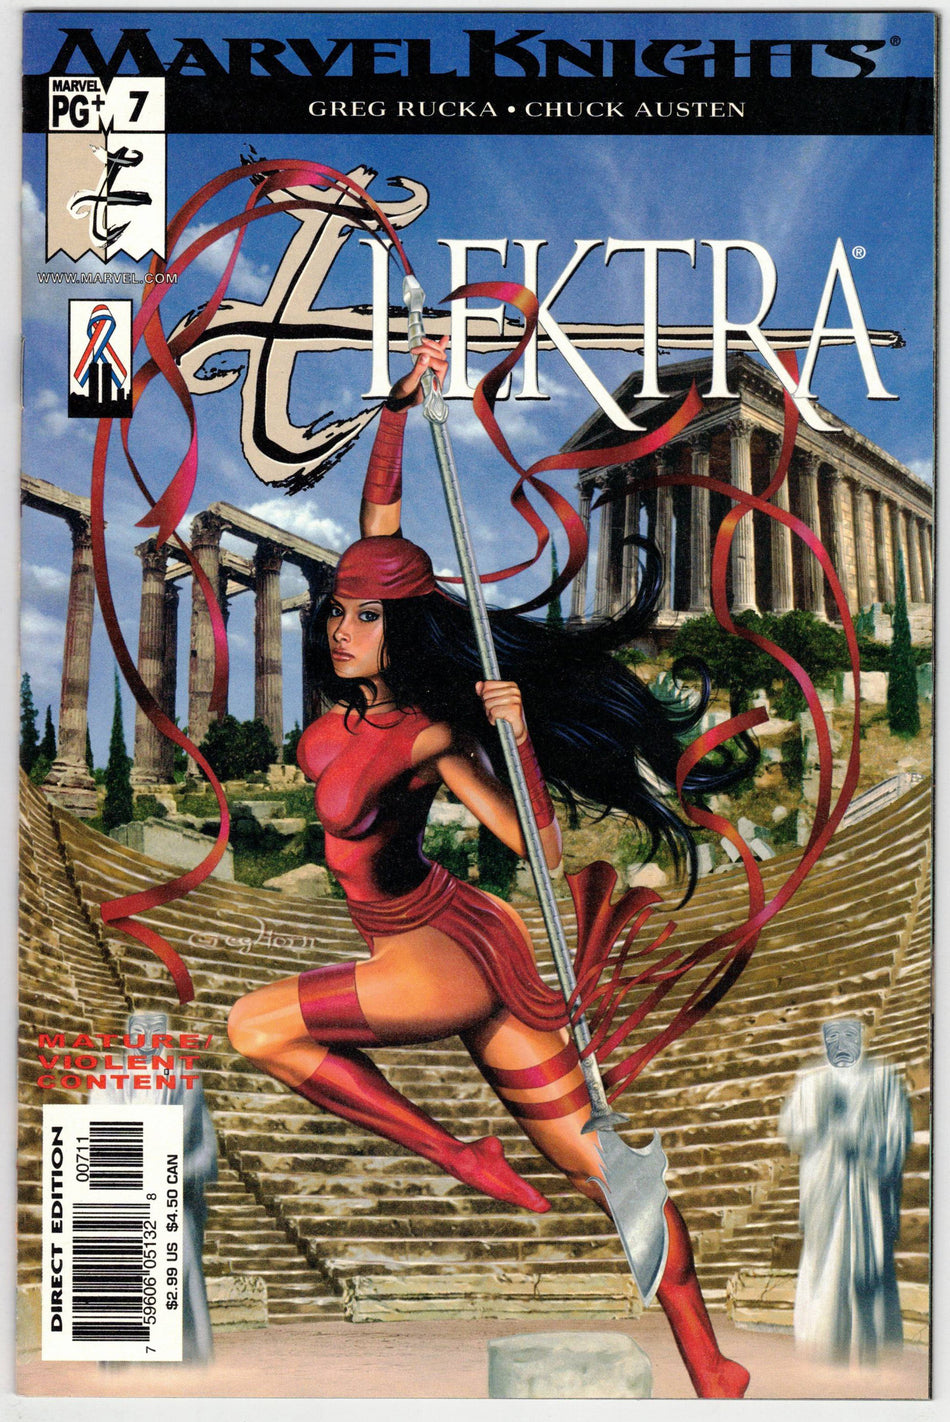 Photo of Elektra, Vol. 2 (2002) Issue 7 - Near Mint Comic sold by Stronghold Collectibles